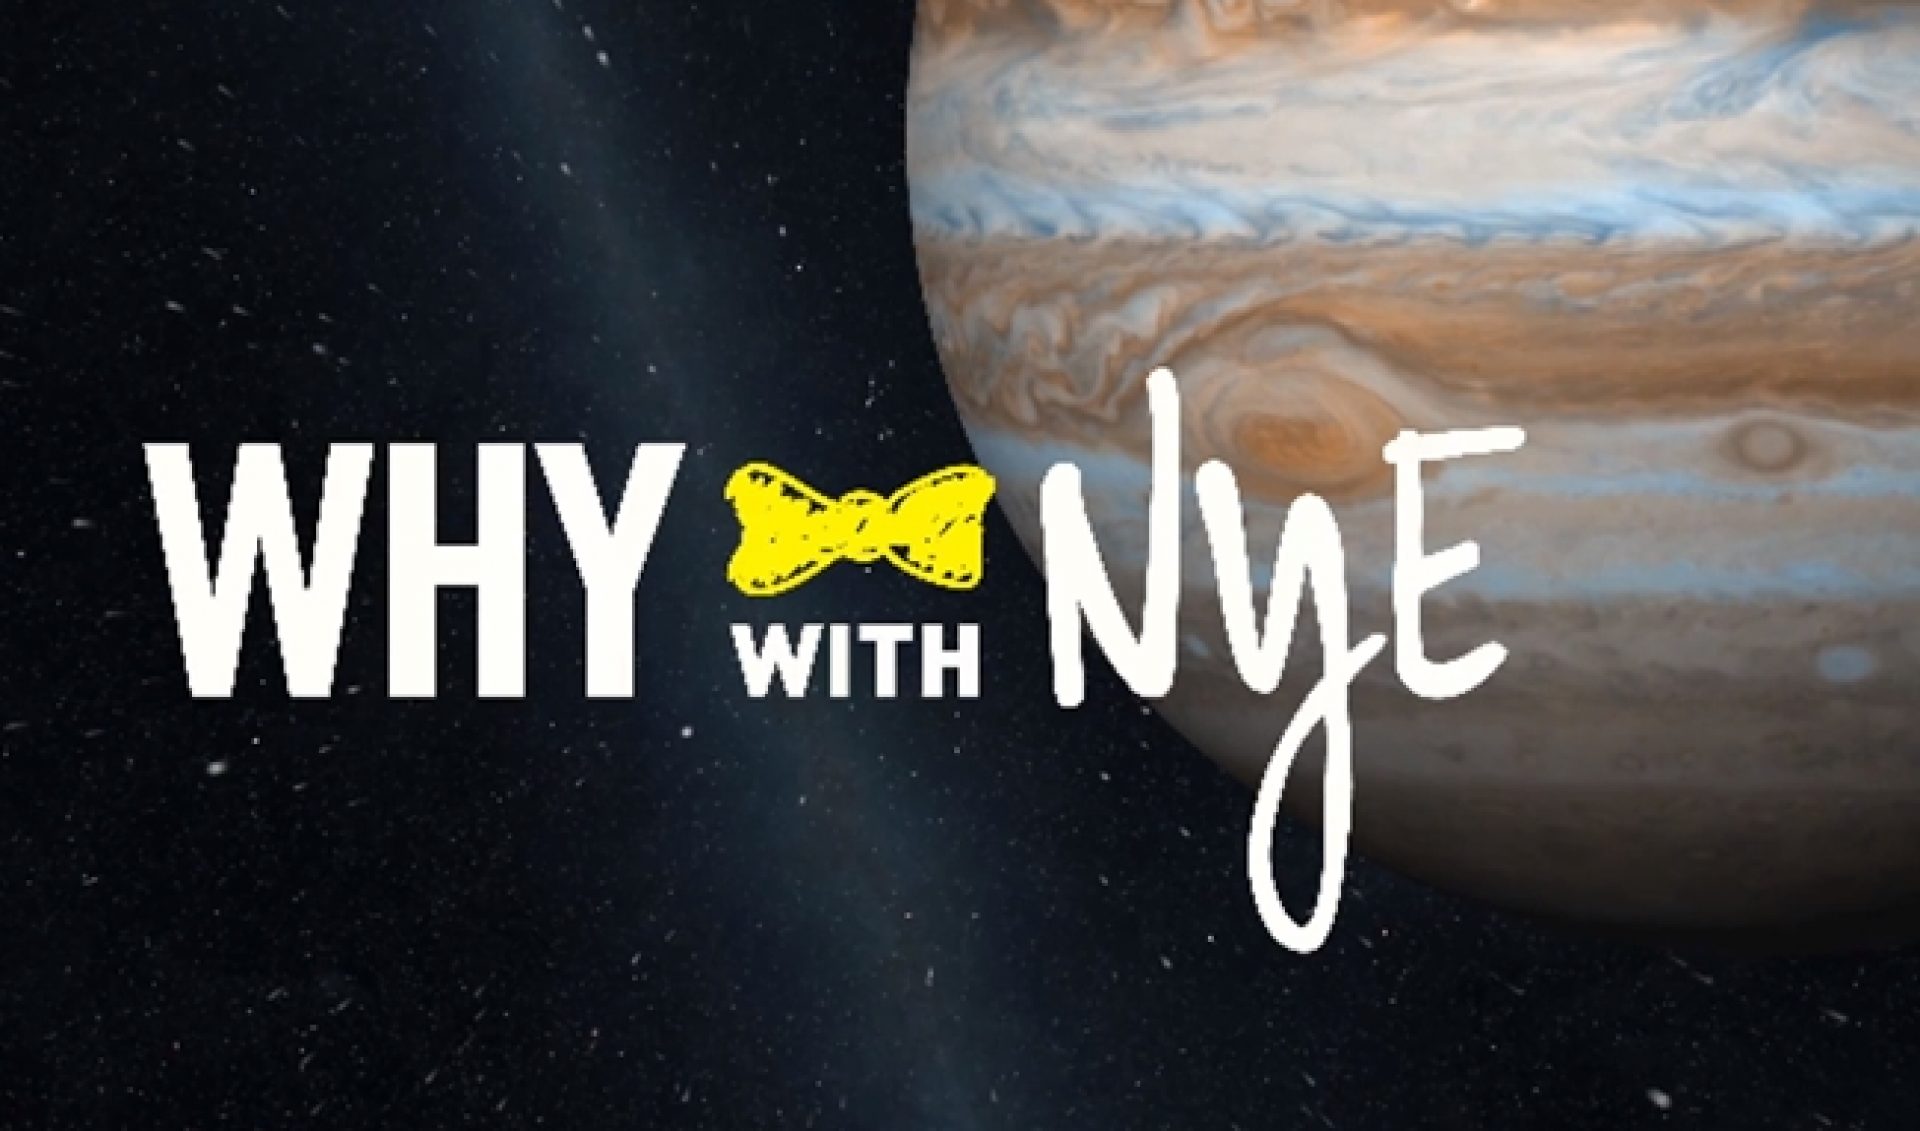 Bill Nye Hypes NASA’s Mission Juno In ‘Why With Nye’ Web Series